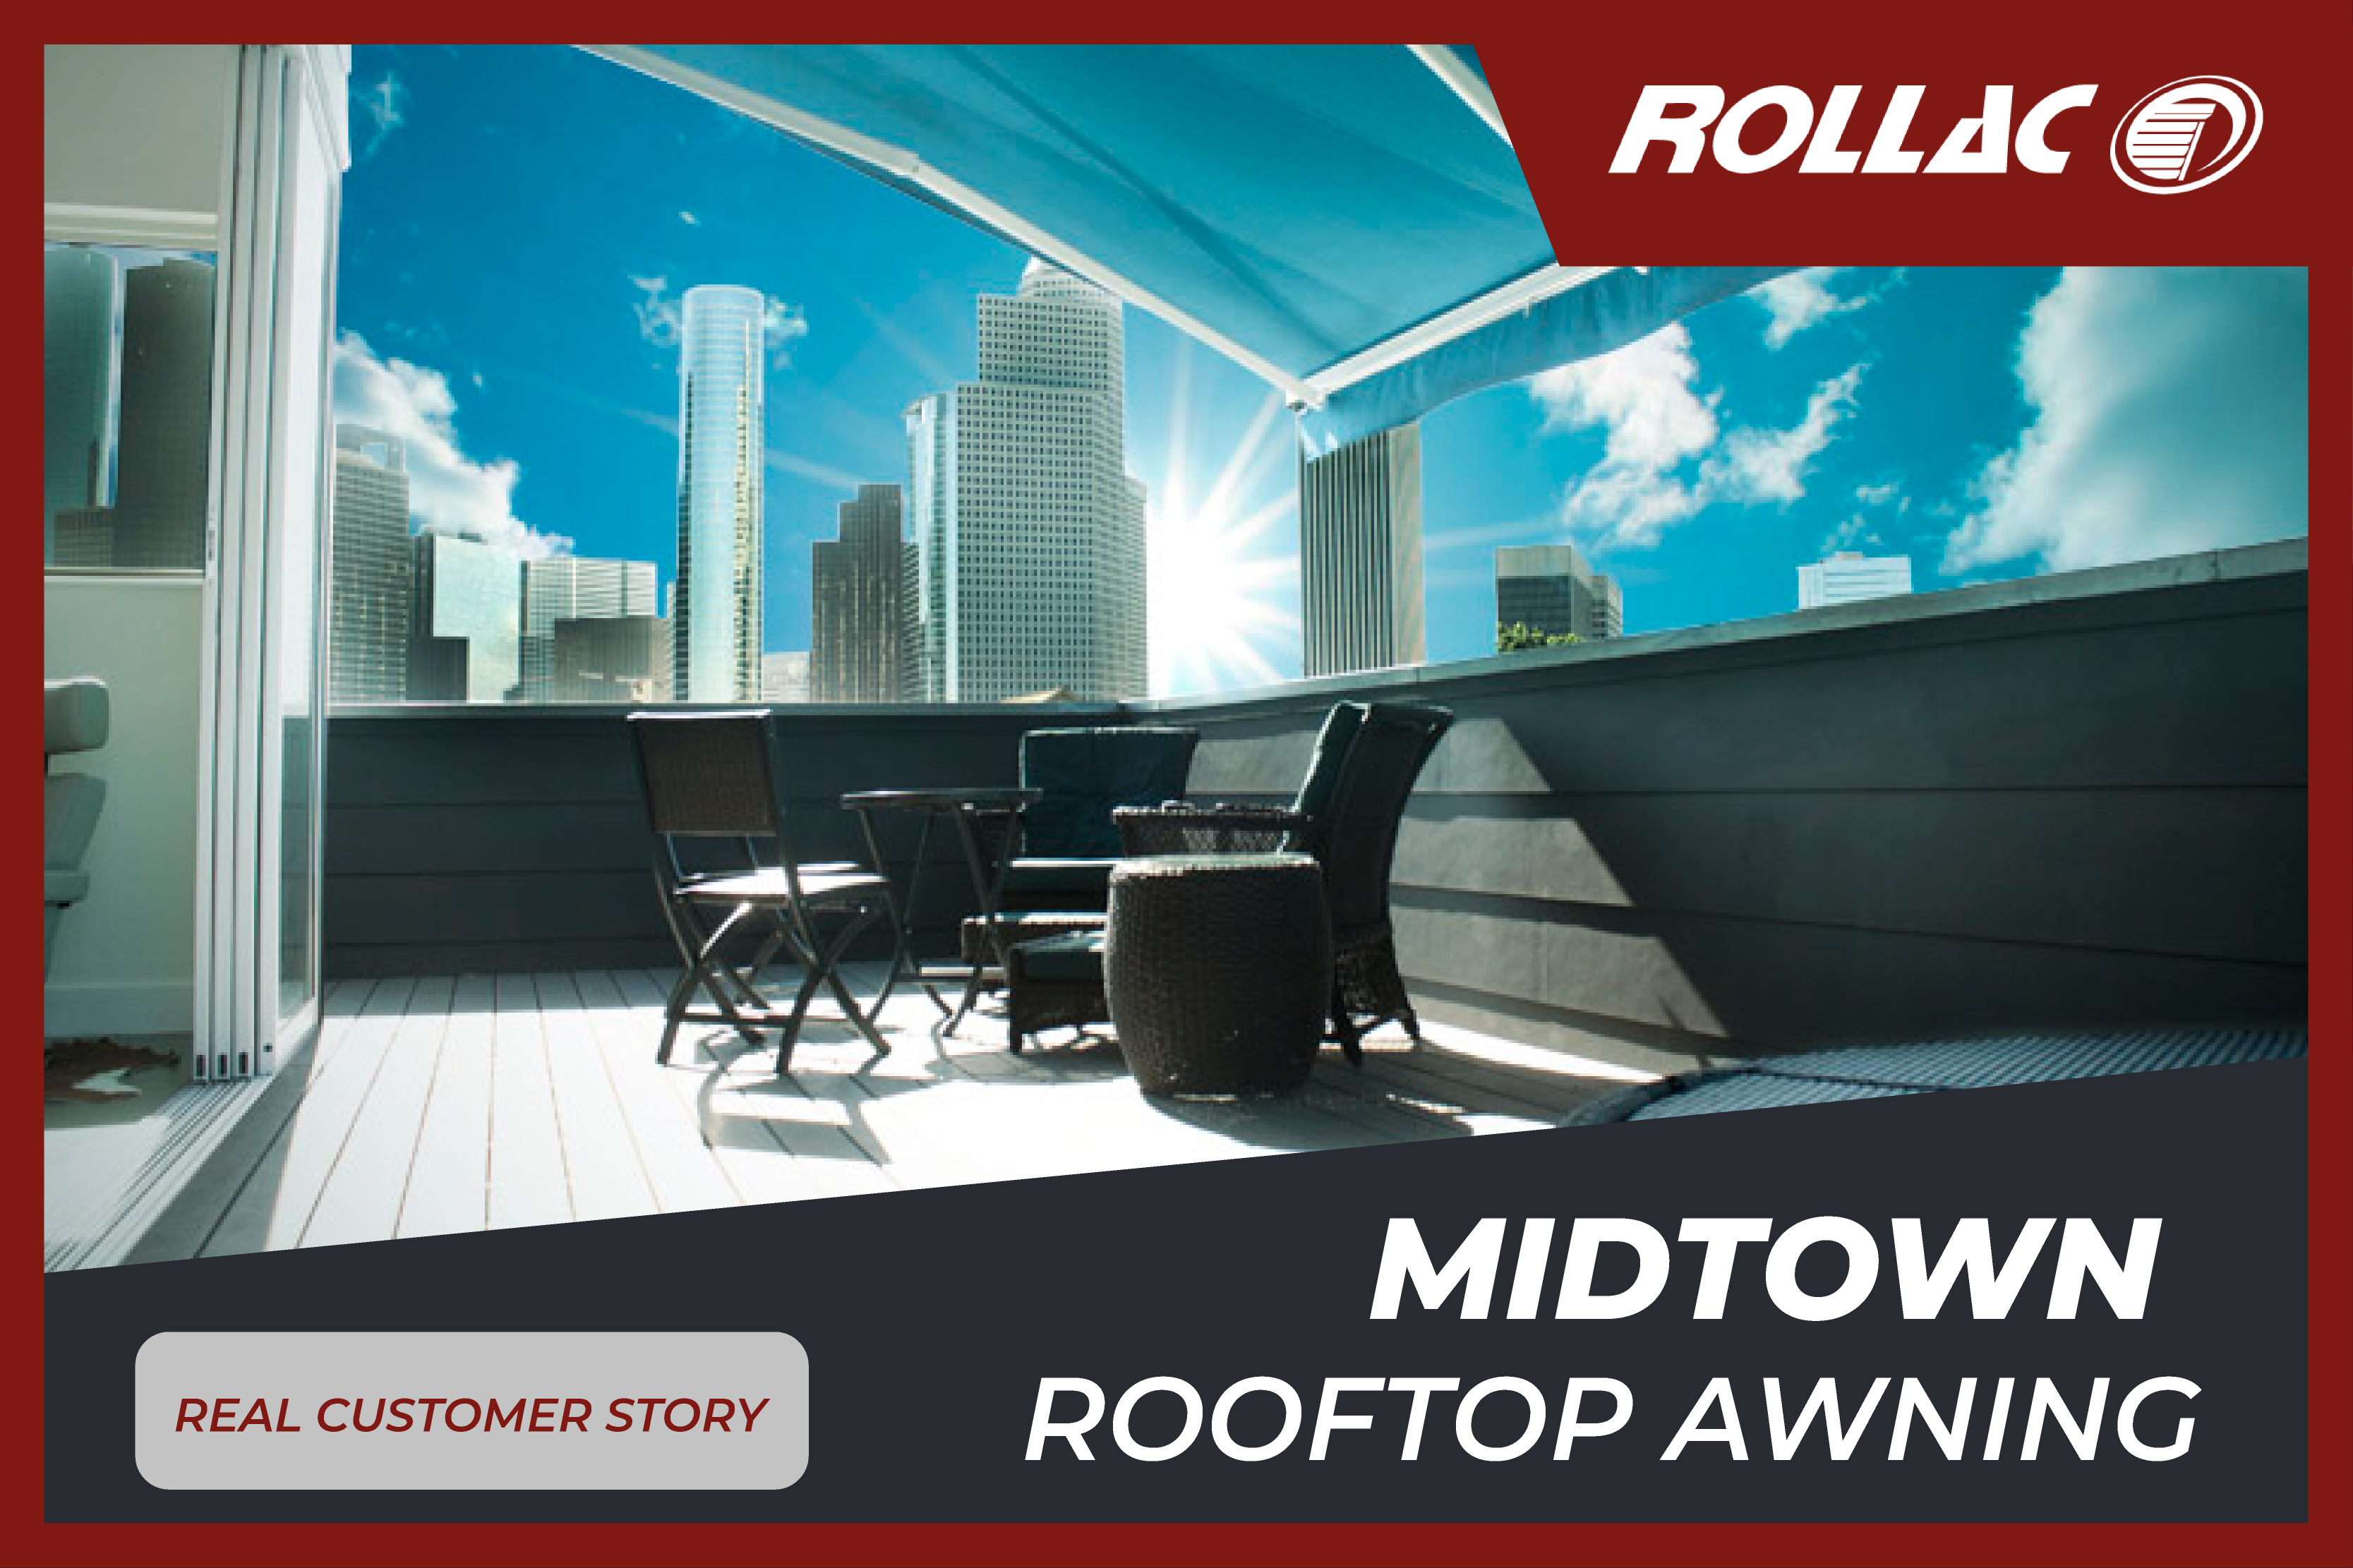 Midtown Rooftop Awning